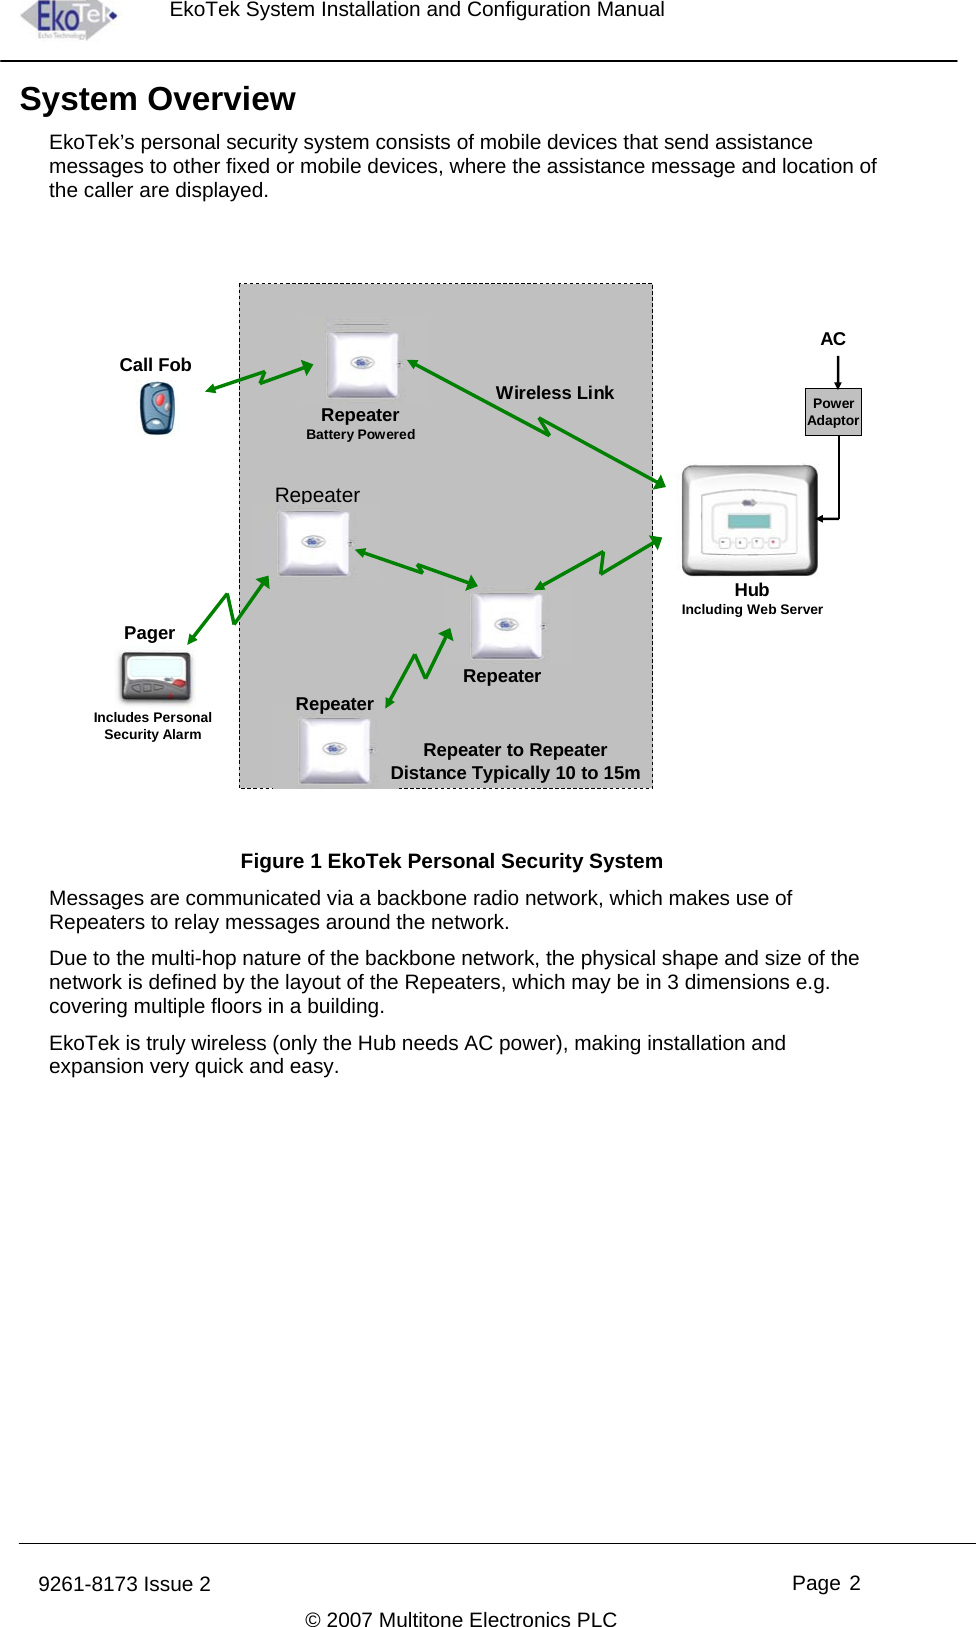 EkoTek System Installation and Configuration Manual System Overview EkoTek’s personal security system consists of mobile devices that send assistance messages to other fixed or mobile devices, where the assistance message and location of the caller are displayed. Includes Personal Security AlarmHubIncluding Web ServerRepeaterWireless LinkCall FobPagerRepeater to RepeaterDistance Typically 10 to 15mRepeaterRepeaterRepeaterBattery PoweredPowerAdaptorAC Figure 1 EkoTek Personal Security System  Messages are communicated via a backbone radio network, which makes use of Repeaters to relay messages around the network. Due to the multi-hop nature of the backbone network, the physical shape and size of the network is defined by the layout of the Repeaters, which may be in 3 dimensions e.g. covering multiple floors in a building. EkoTek is truly wireless (only the Hub needs AC power), making installation and expansion very quick and easy. 9261-8173 Issue 2   Page 2  © 2007 Multitone Electronics PLC 